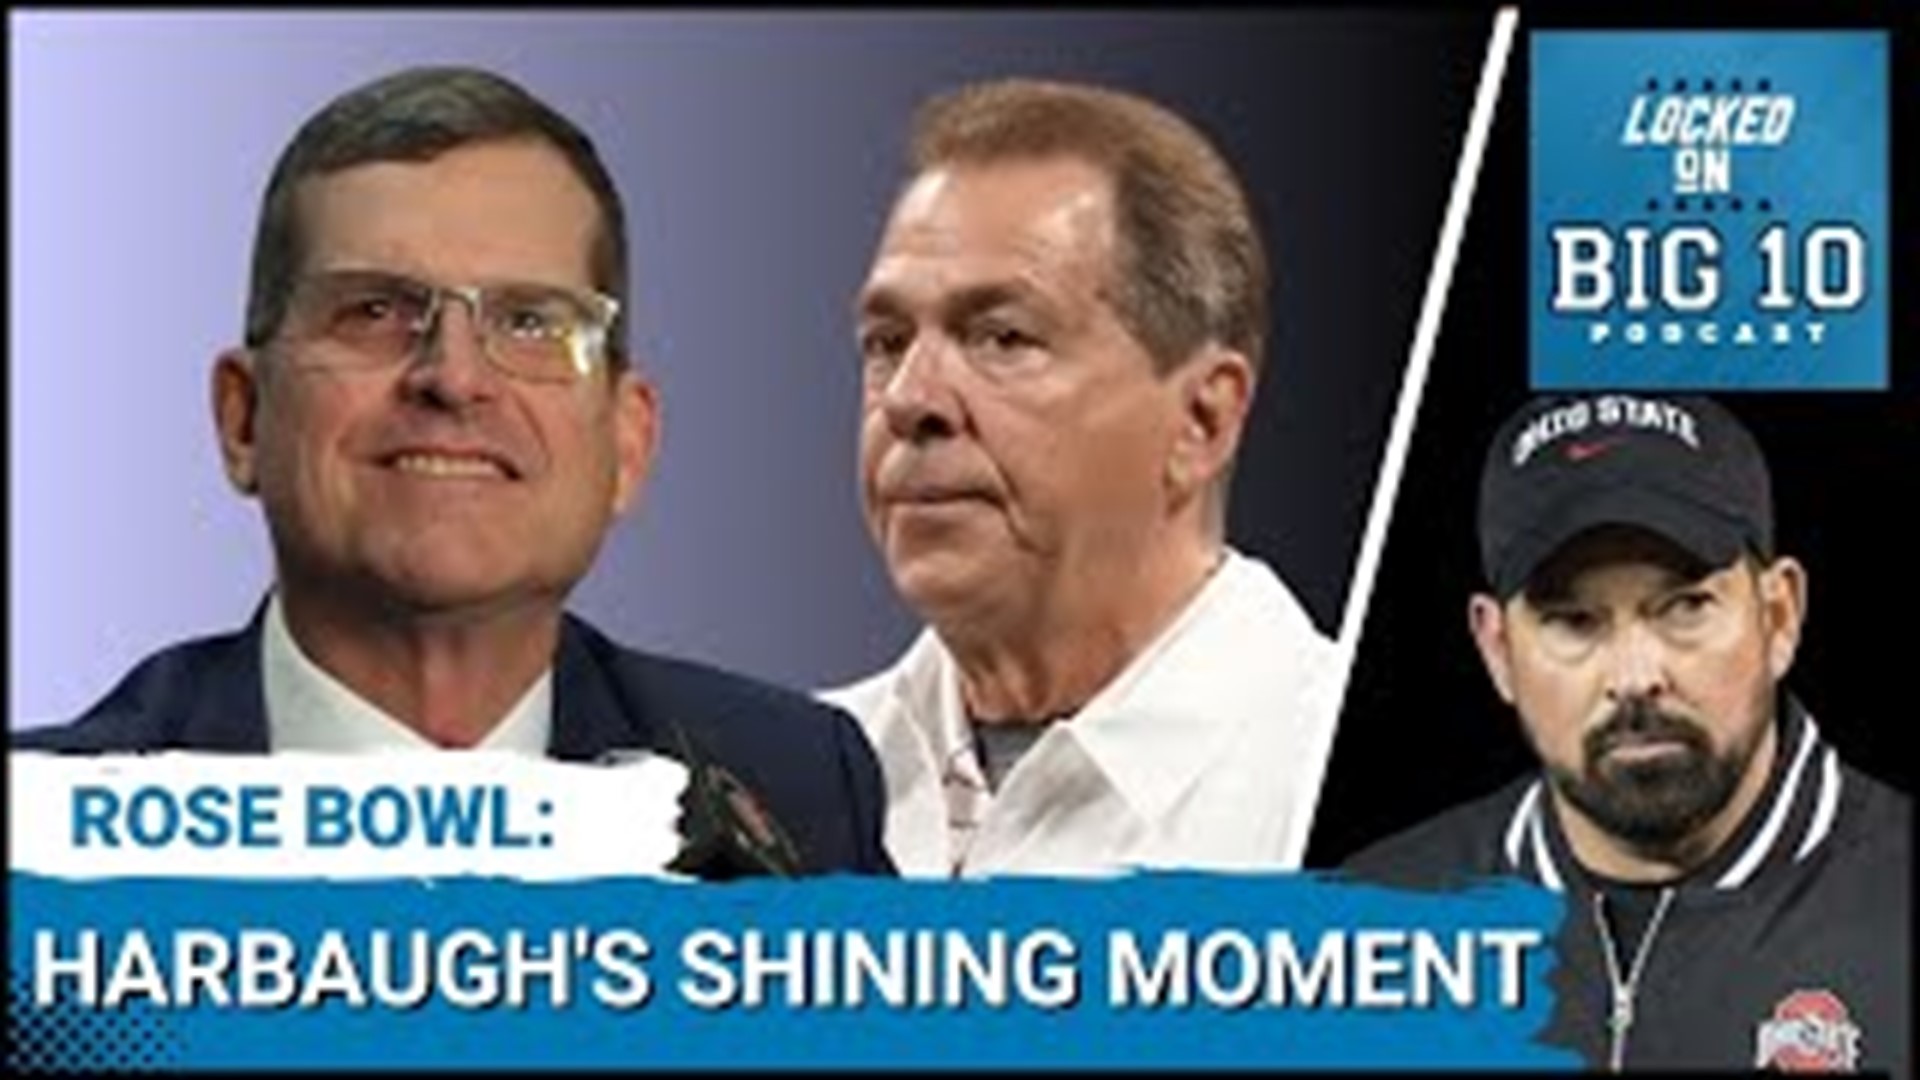 Jim Harbaugh may be on the verge of his best moment as the head coach of the Michigan Wolverines if he beats Nick Saban and Alabama in the Rose Bowl.